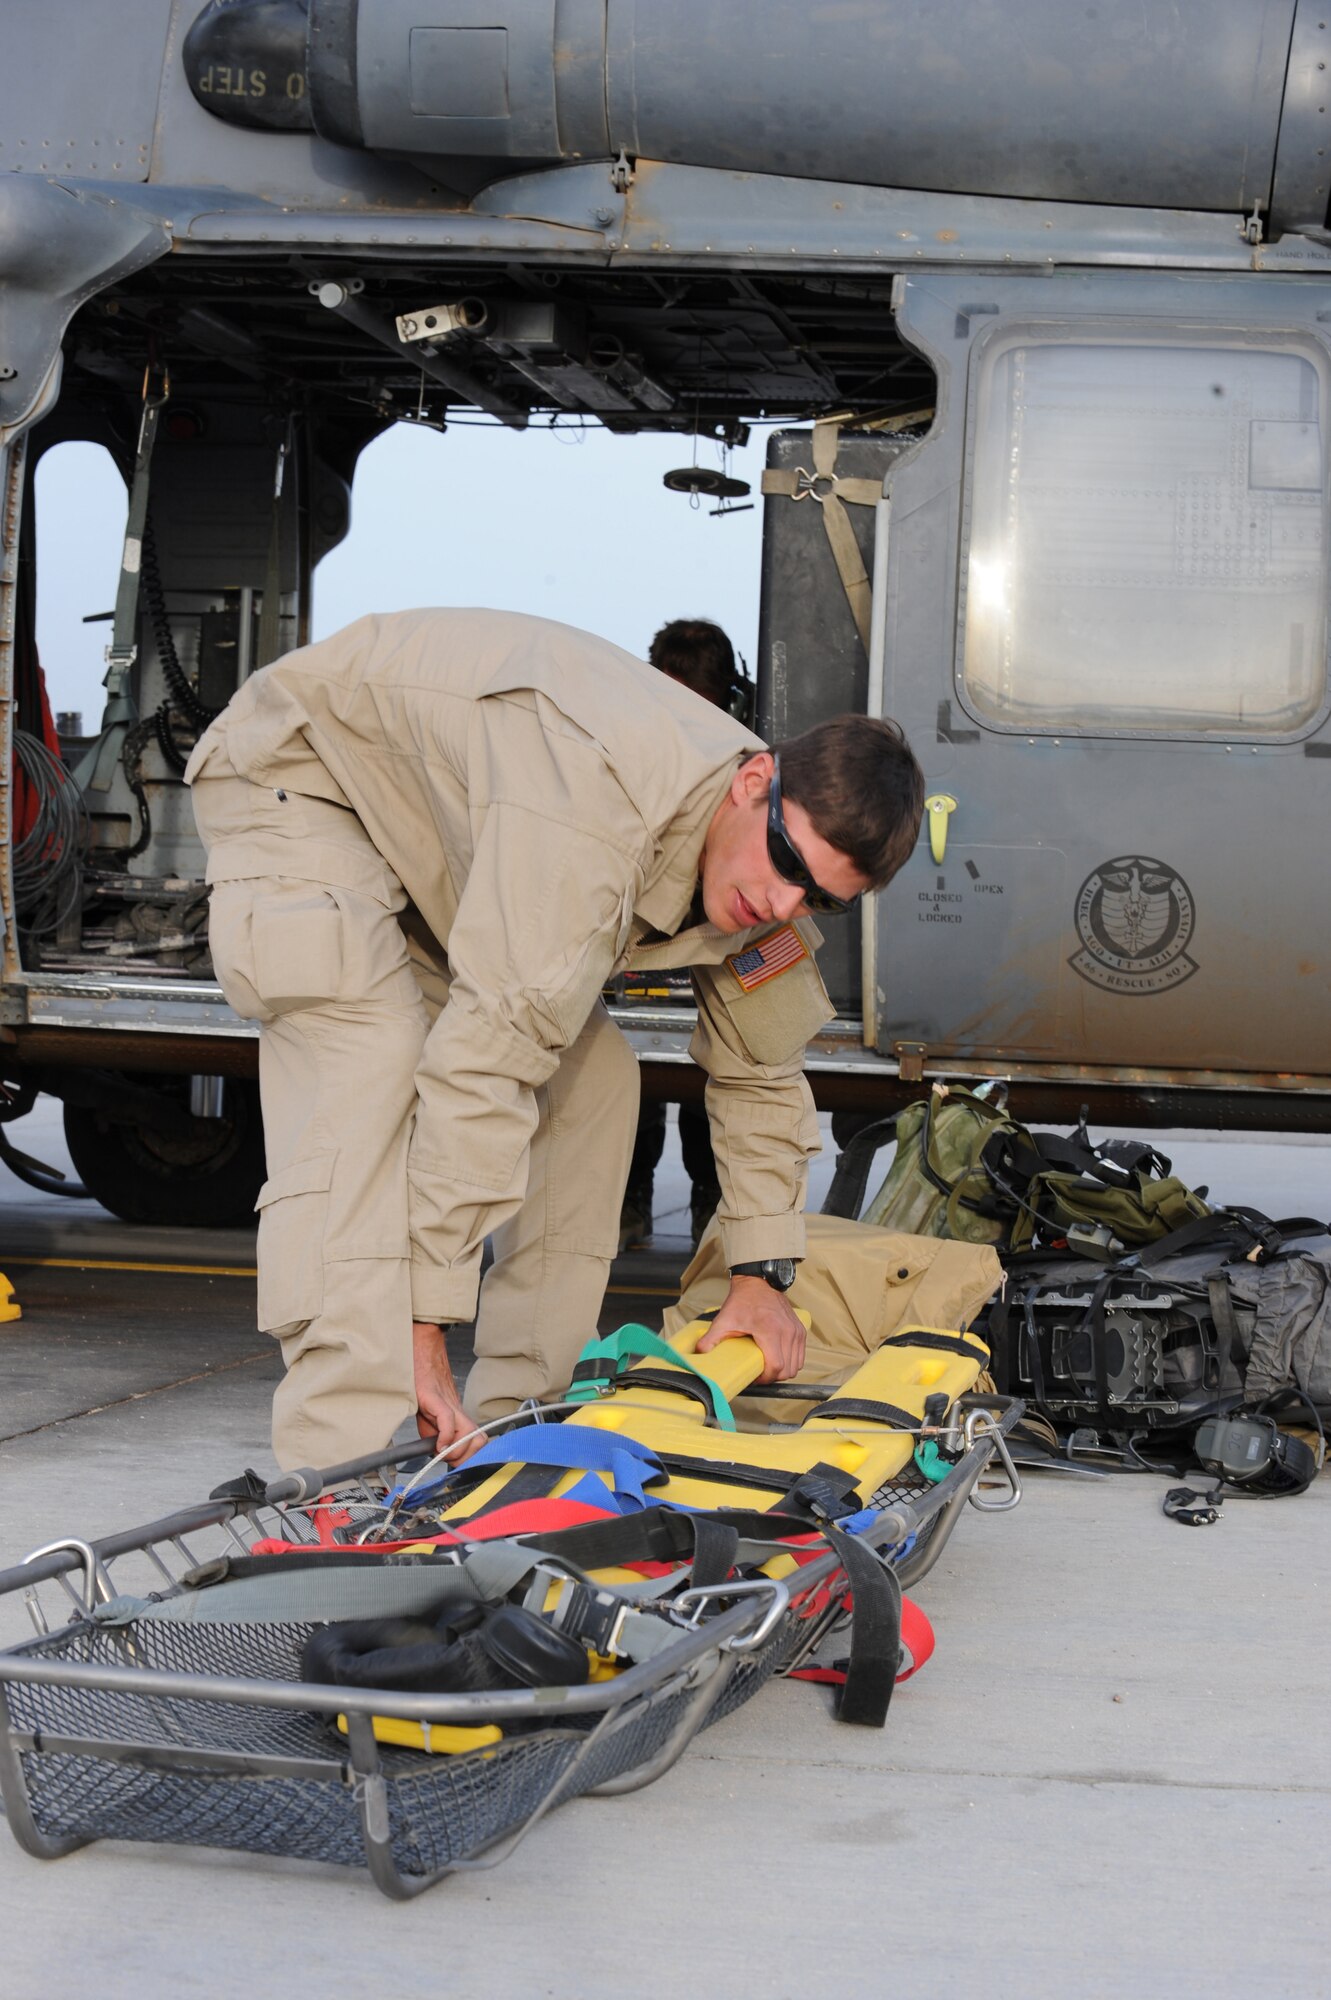 Senior Airman David Coval prepares to load a litter onto an HH-60G Pave Hawk prior to departing for a rescue mission May 1 at Nellis Air Force Base, Nev. Four helicopters and 24 Airmen from the 58th and 66th Rescue Squadrons deployed to assist in the search for a pilot and passenger who were aboard a motorized sailplane that disappeared from radar April 24 in the Sierra Nevada Mountain Range near Mammoth Lakes, Calif. Airman Coval is a pararescueman with the 58th Rescue Squadron. (U.S. Air Force photo/Senior Airman Nadine Y. Barclay)
